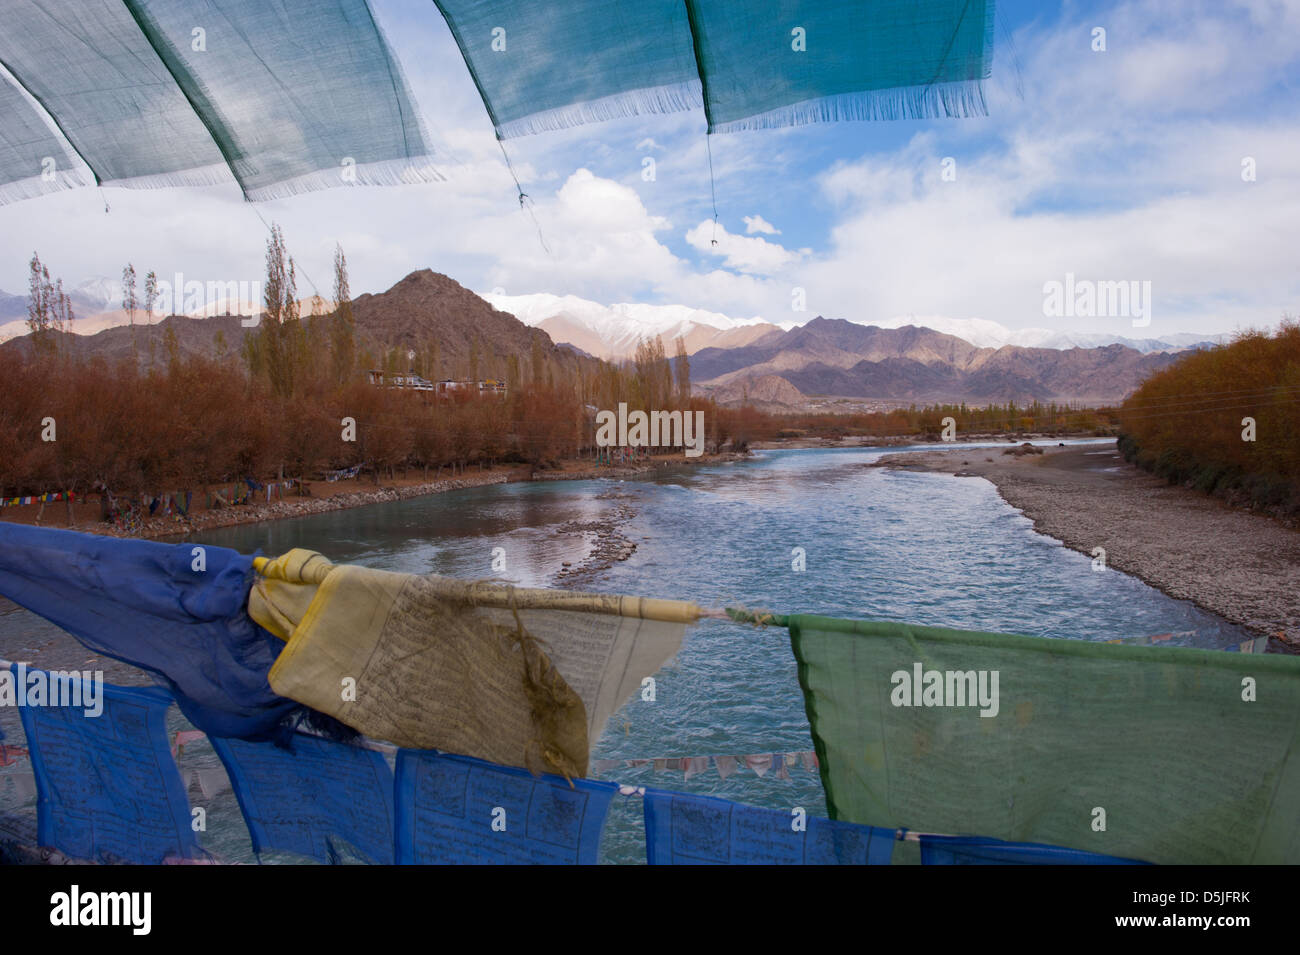 A view of the Indus River with prayer flags at Leh, Ladakh, Jammu and Kashmir. India. Stock Photo